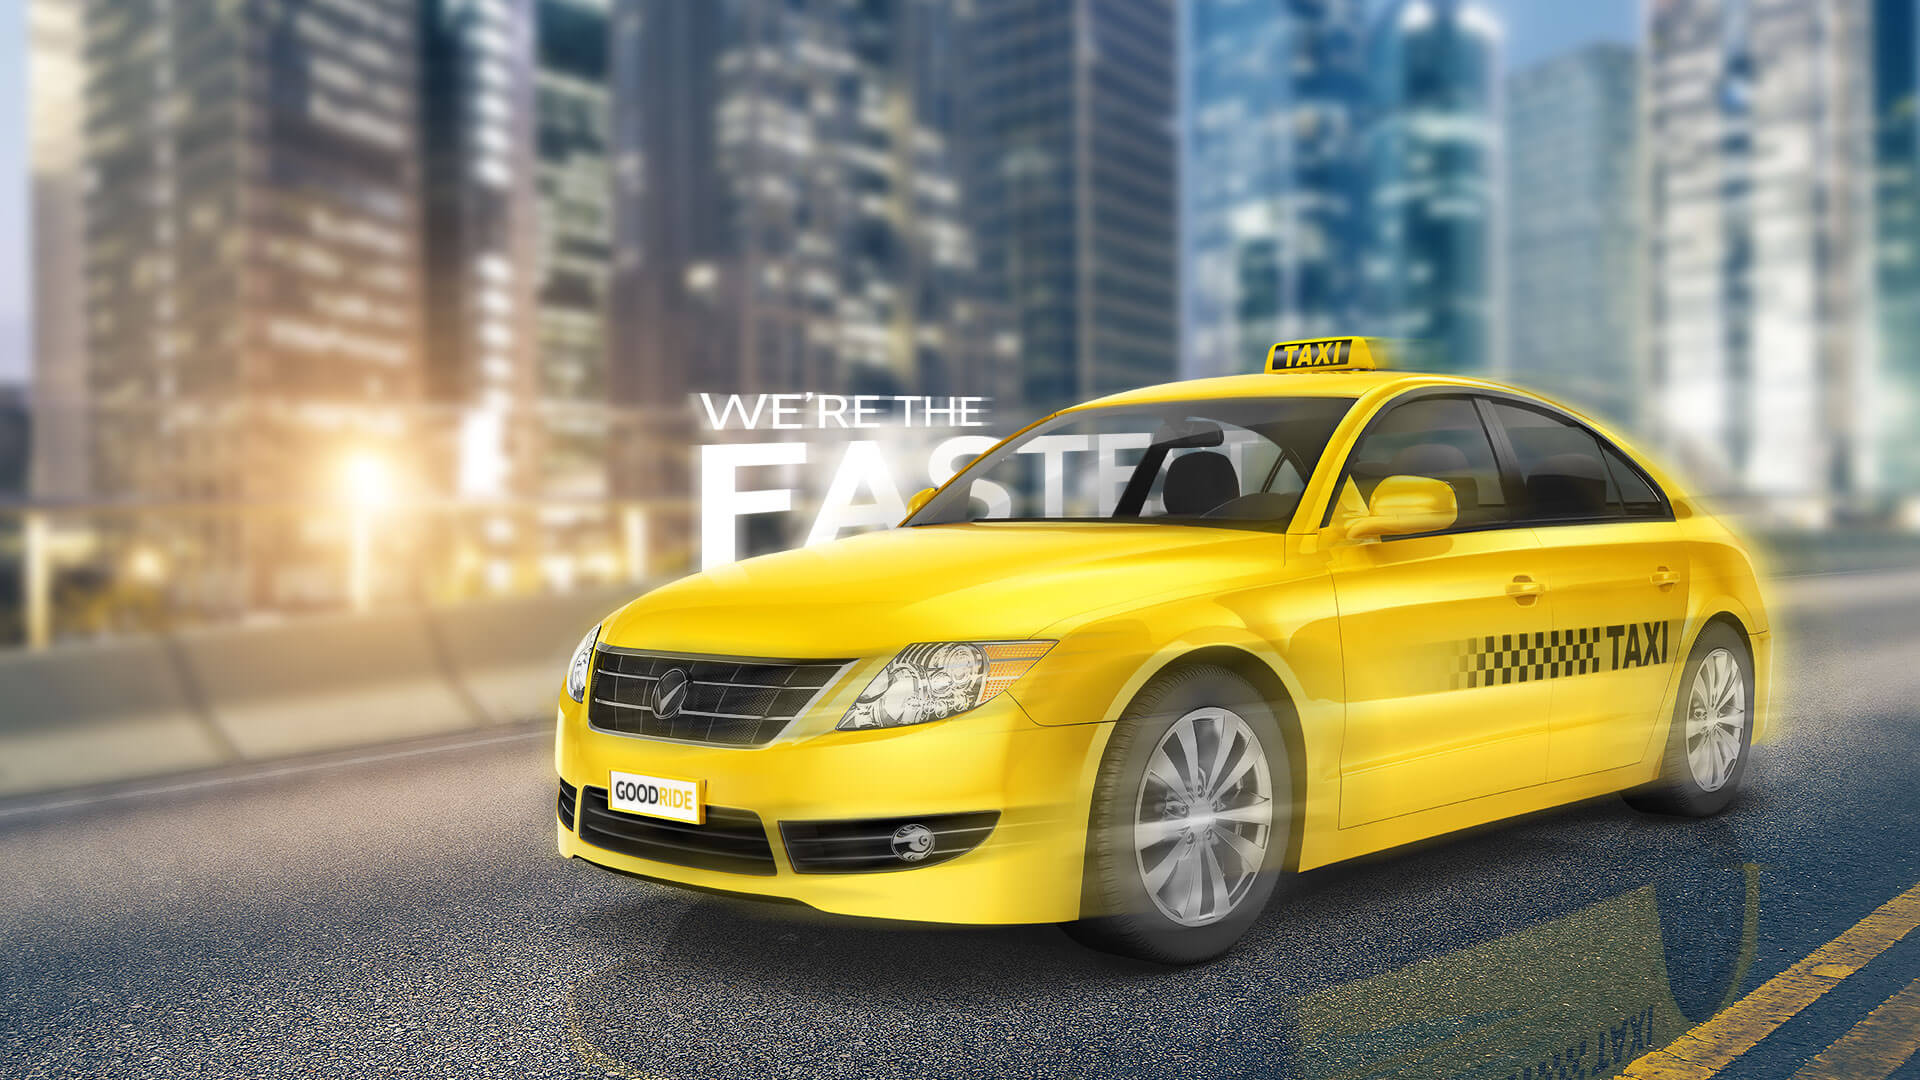 We Provide 24 Hours Taxis And Minicabs in Harrow - Harrow Taxis